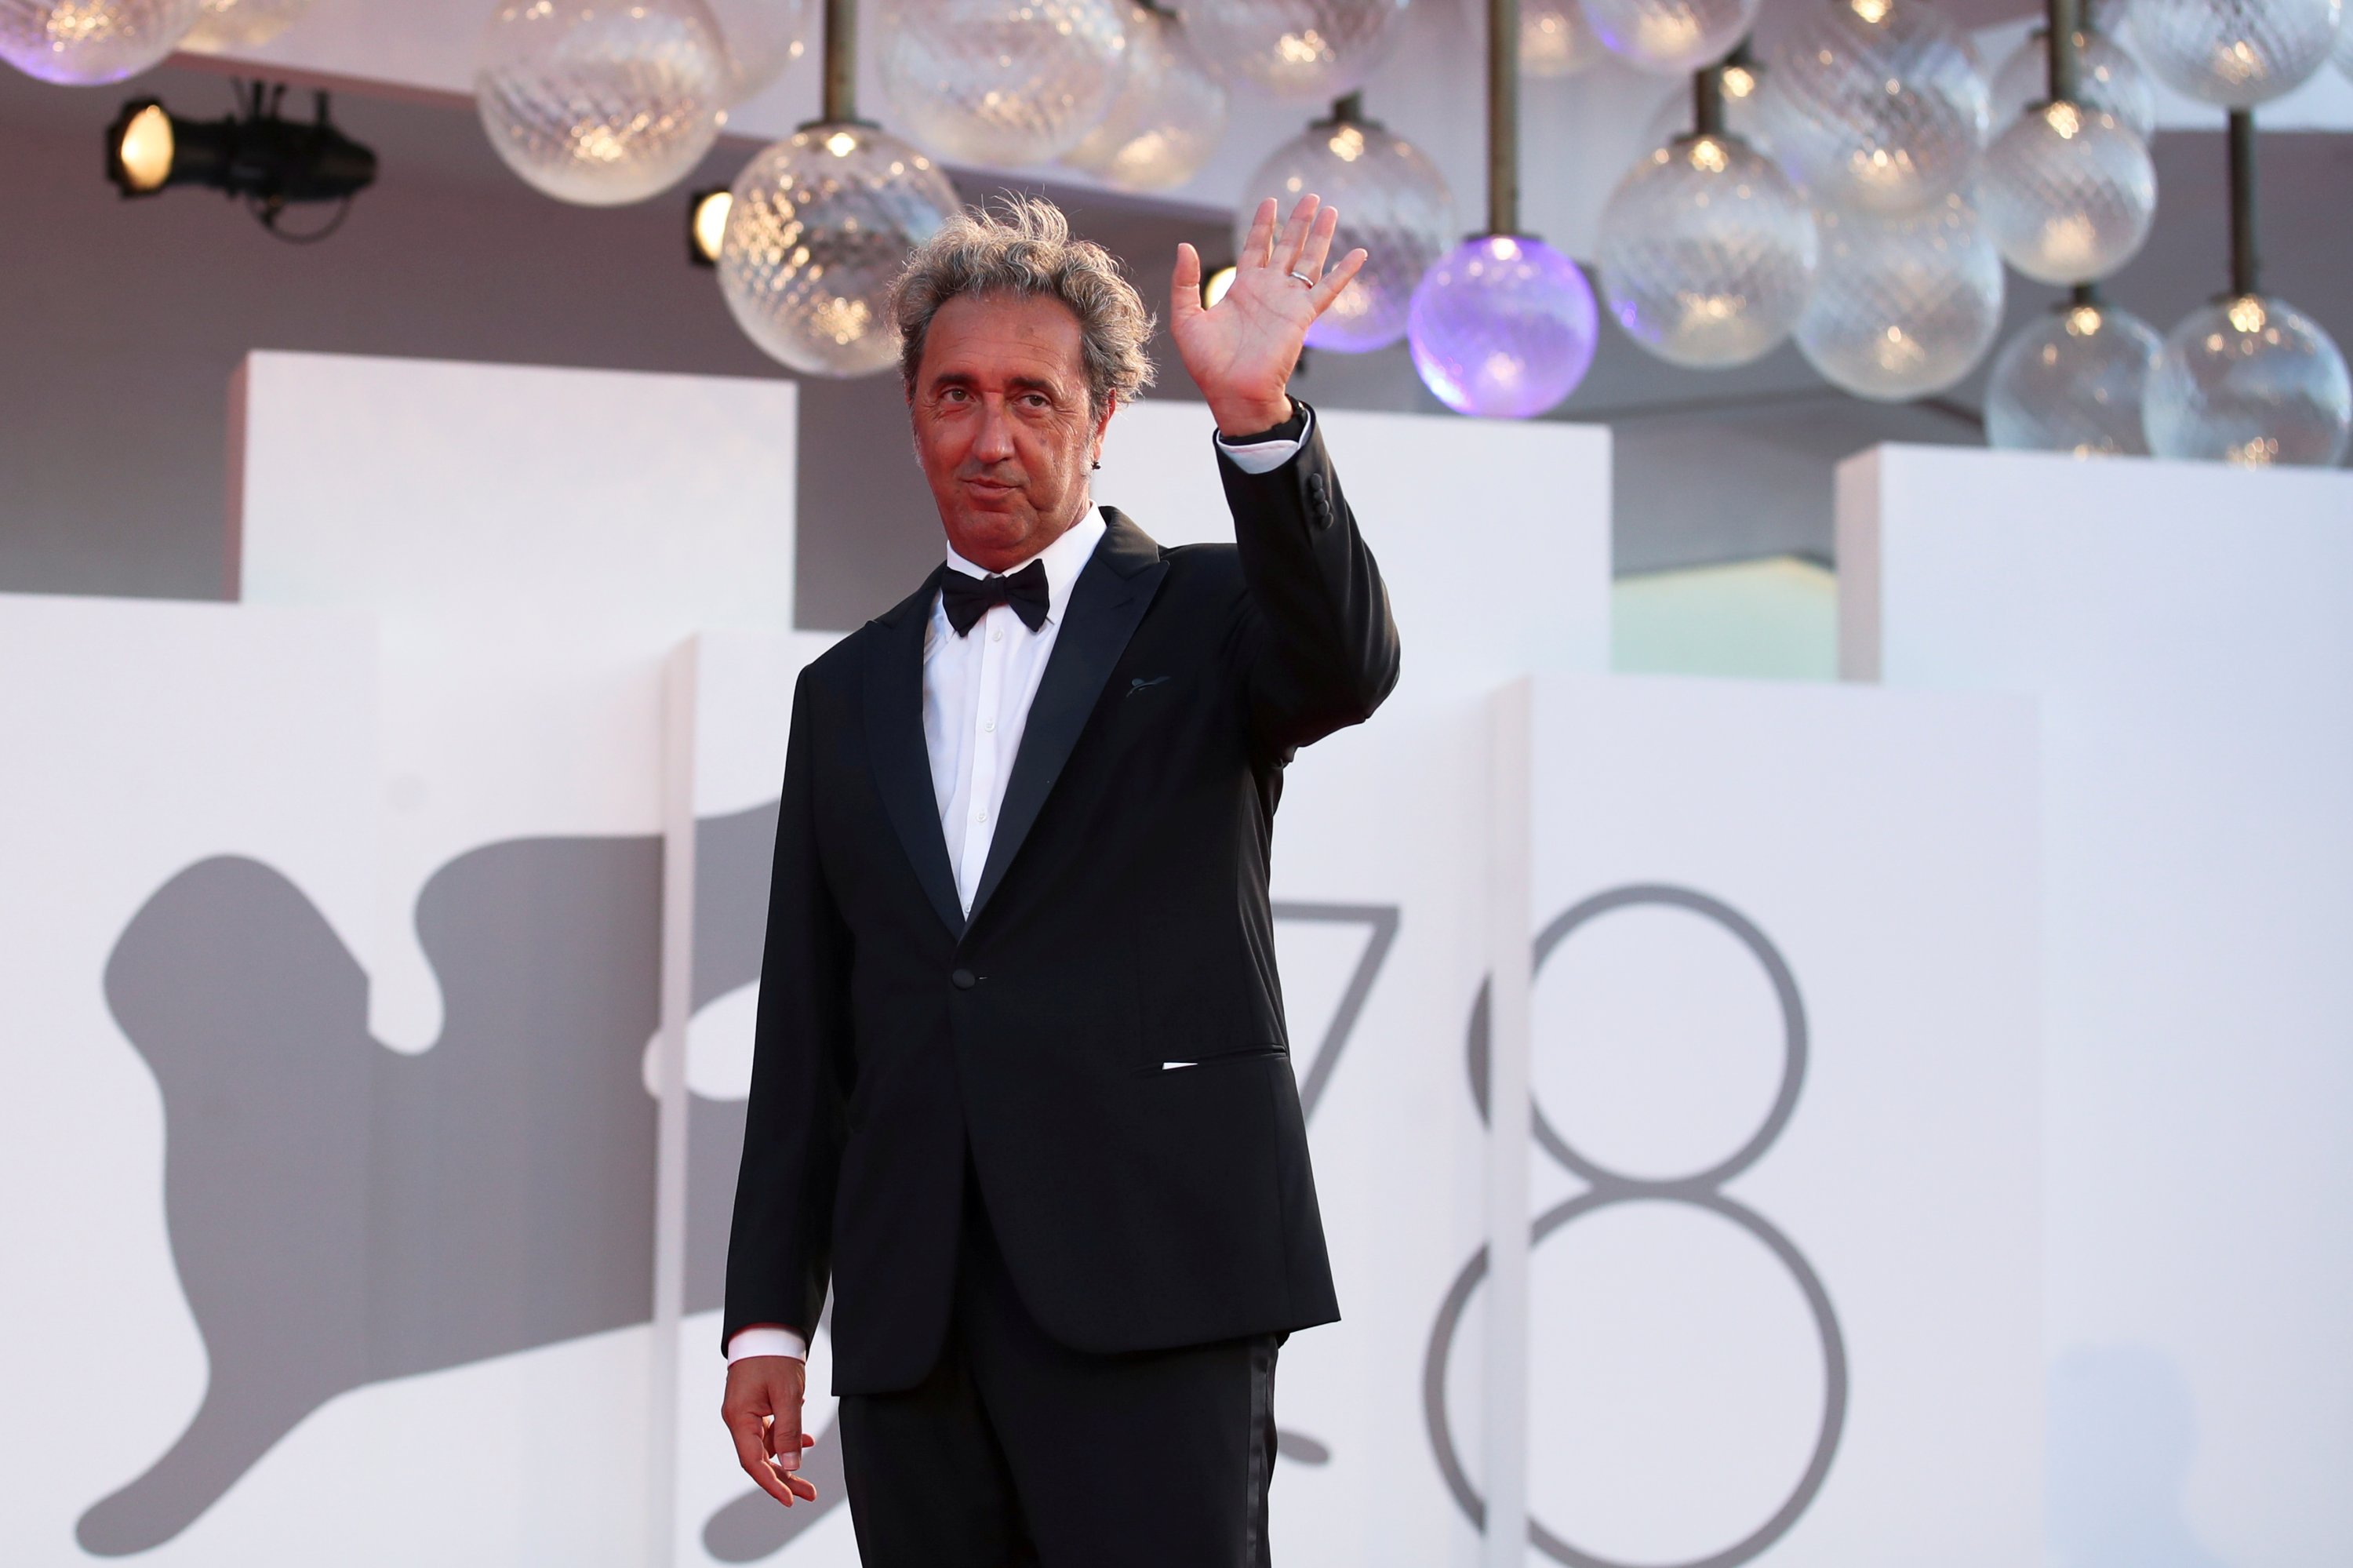 Director Paolo Sorrentino poses at the 78th Venice Film Festival, Venice, Italy, Sept. 2, 2021. (REUTERS)